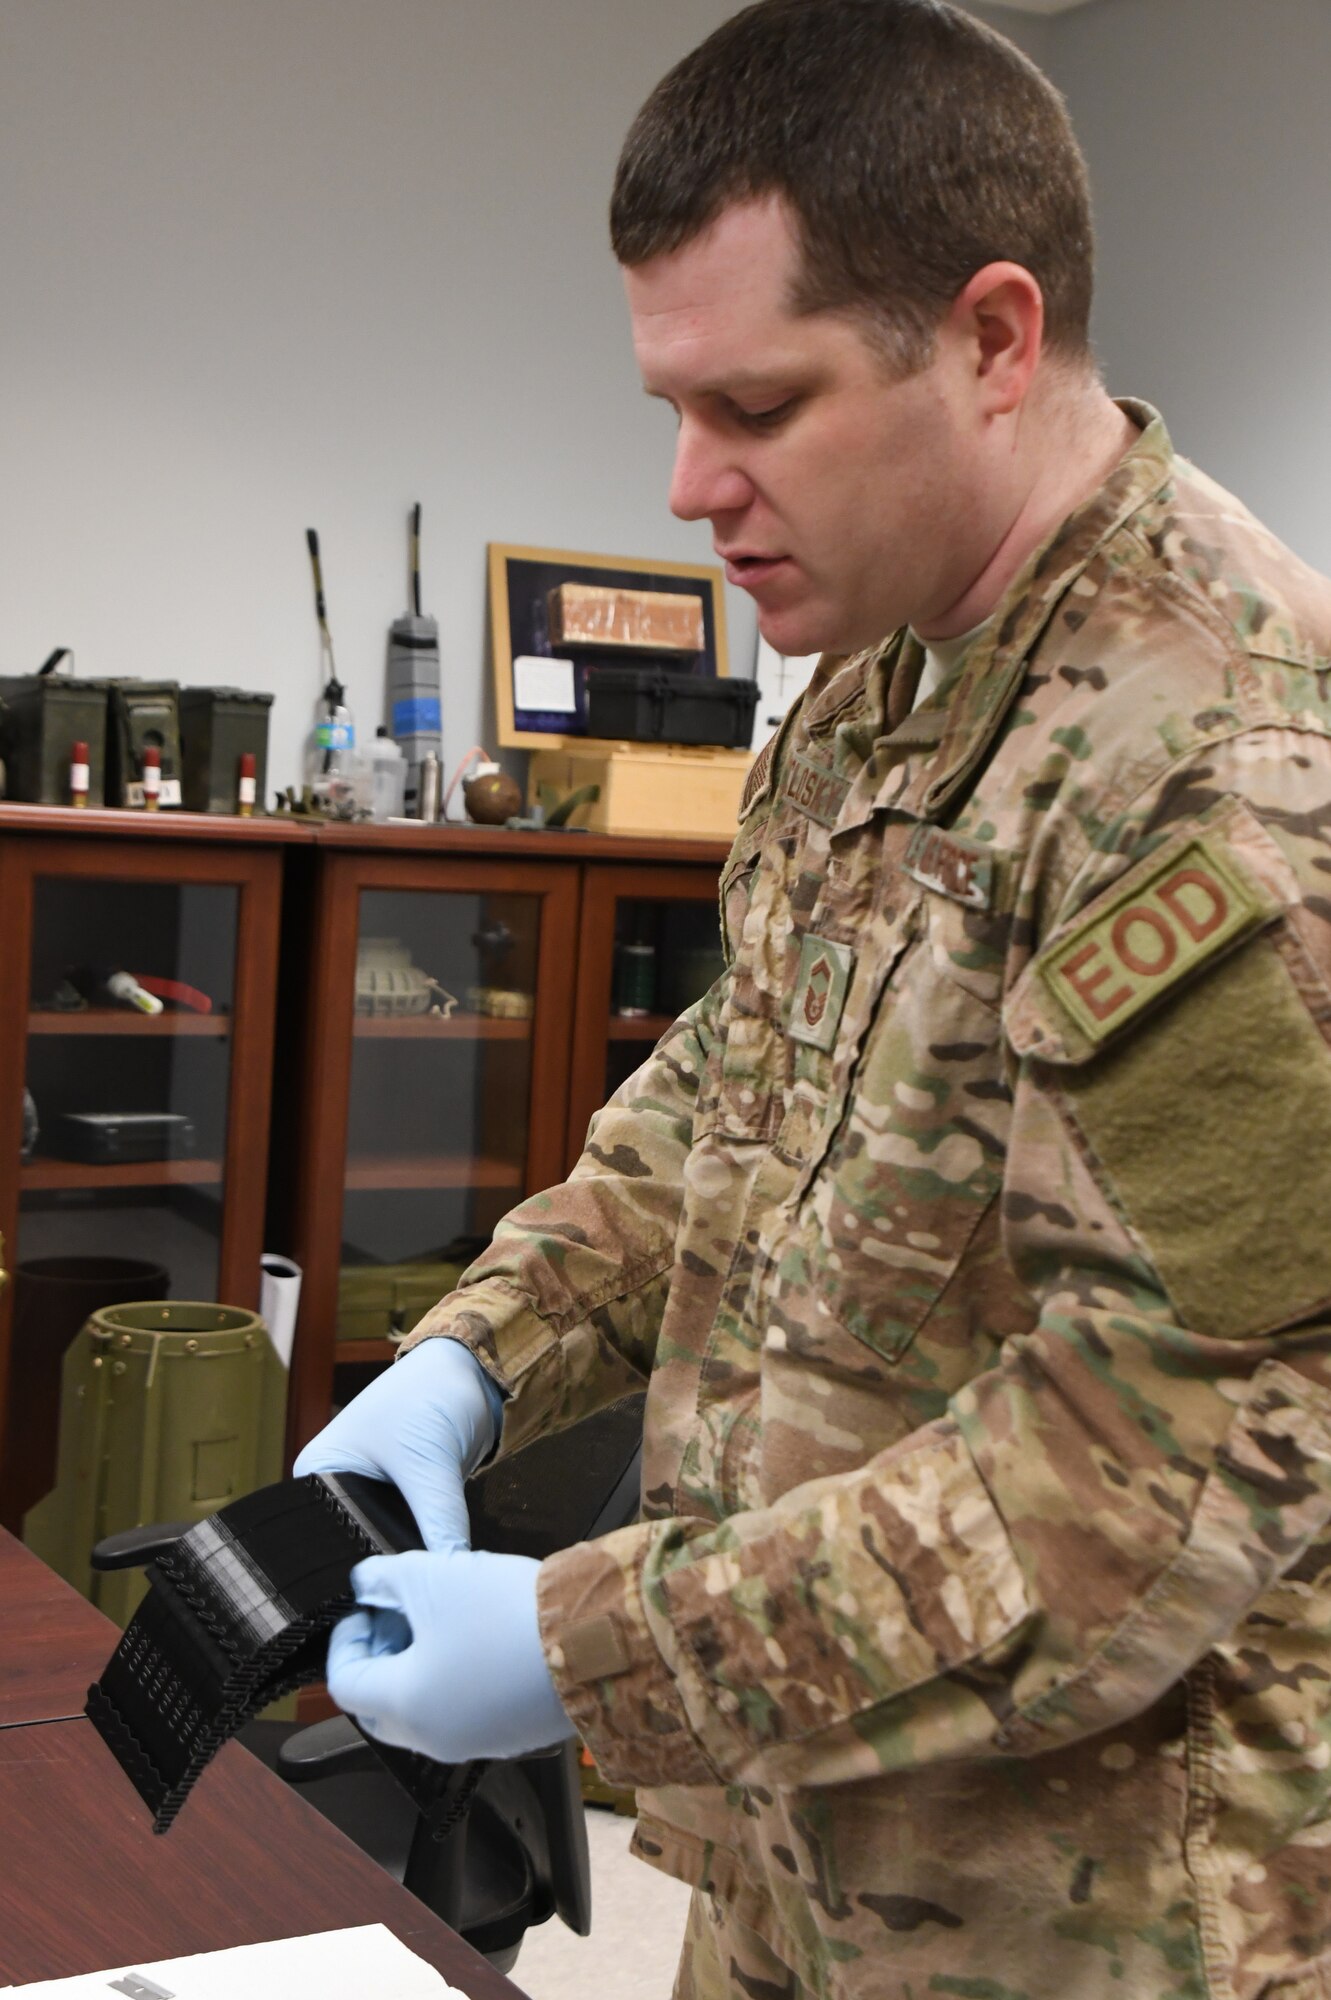 Senior Master Sgt. Jeremiah Mcclosky, Explosive Ordnance Disposal Superintendent, 104th Fighter Wing, prints a protective mask from a 3D printer for the 104th Fighter Wing Medical Group. The 104th Fighter Wing Medical Group is responding to state COVID-19 response efforts throughout the state of Massachusetts. (U.S. Air National Guard photo by Airman 1st Class Sara Kolinski)